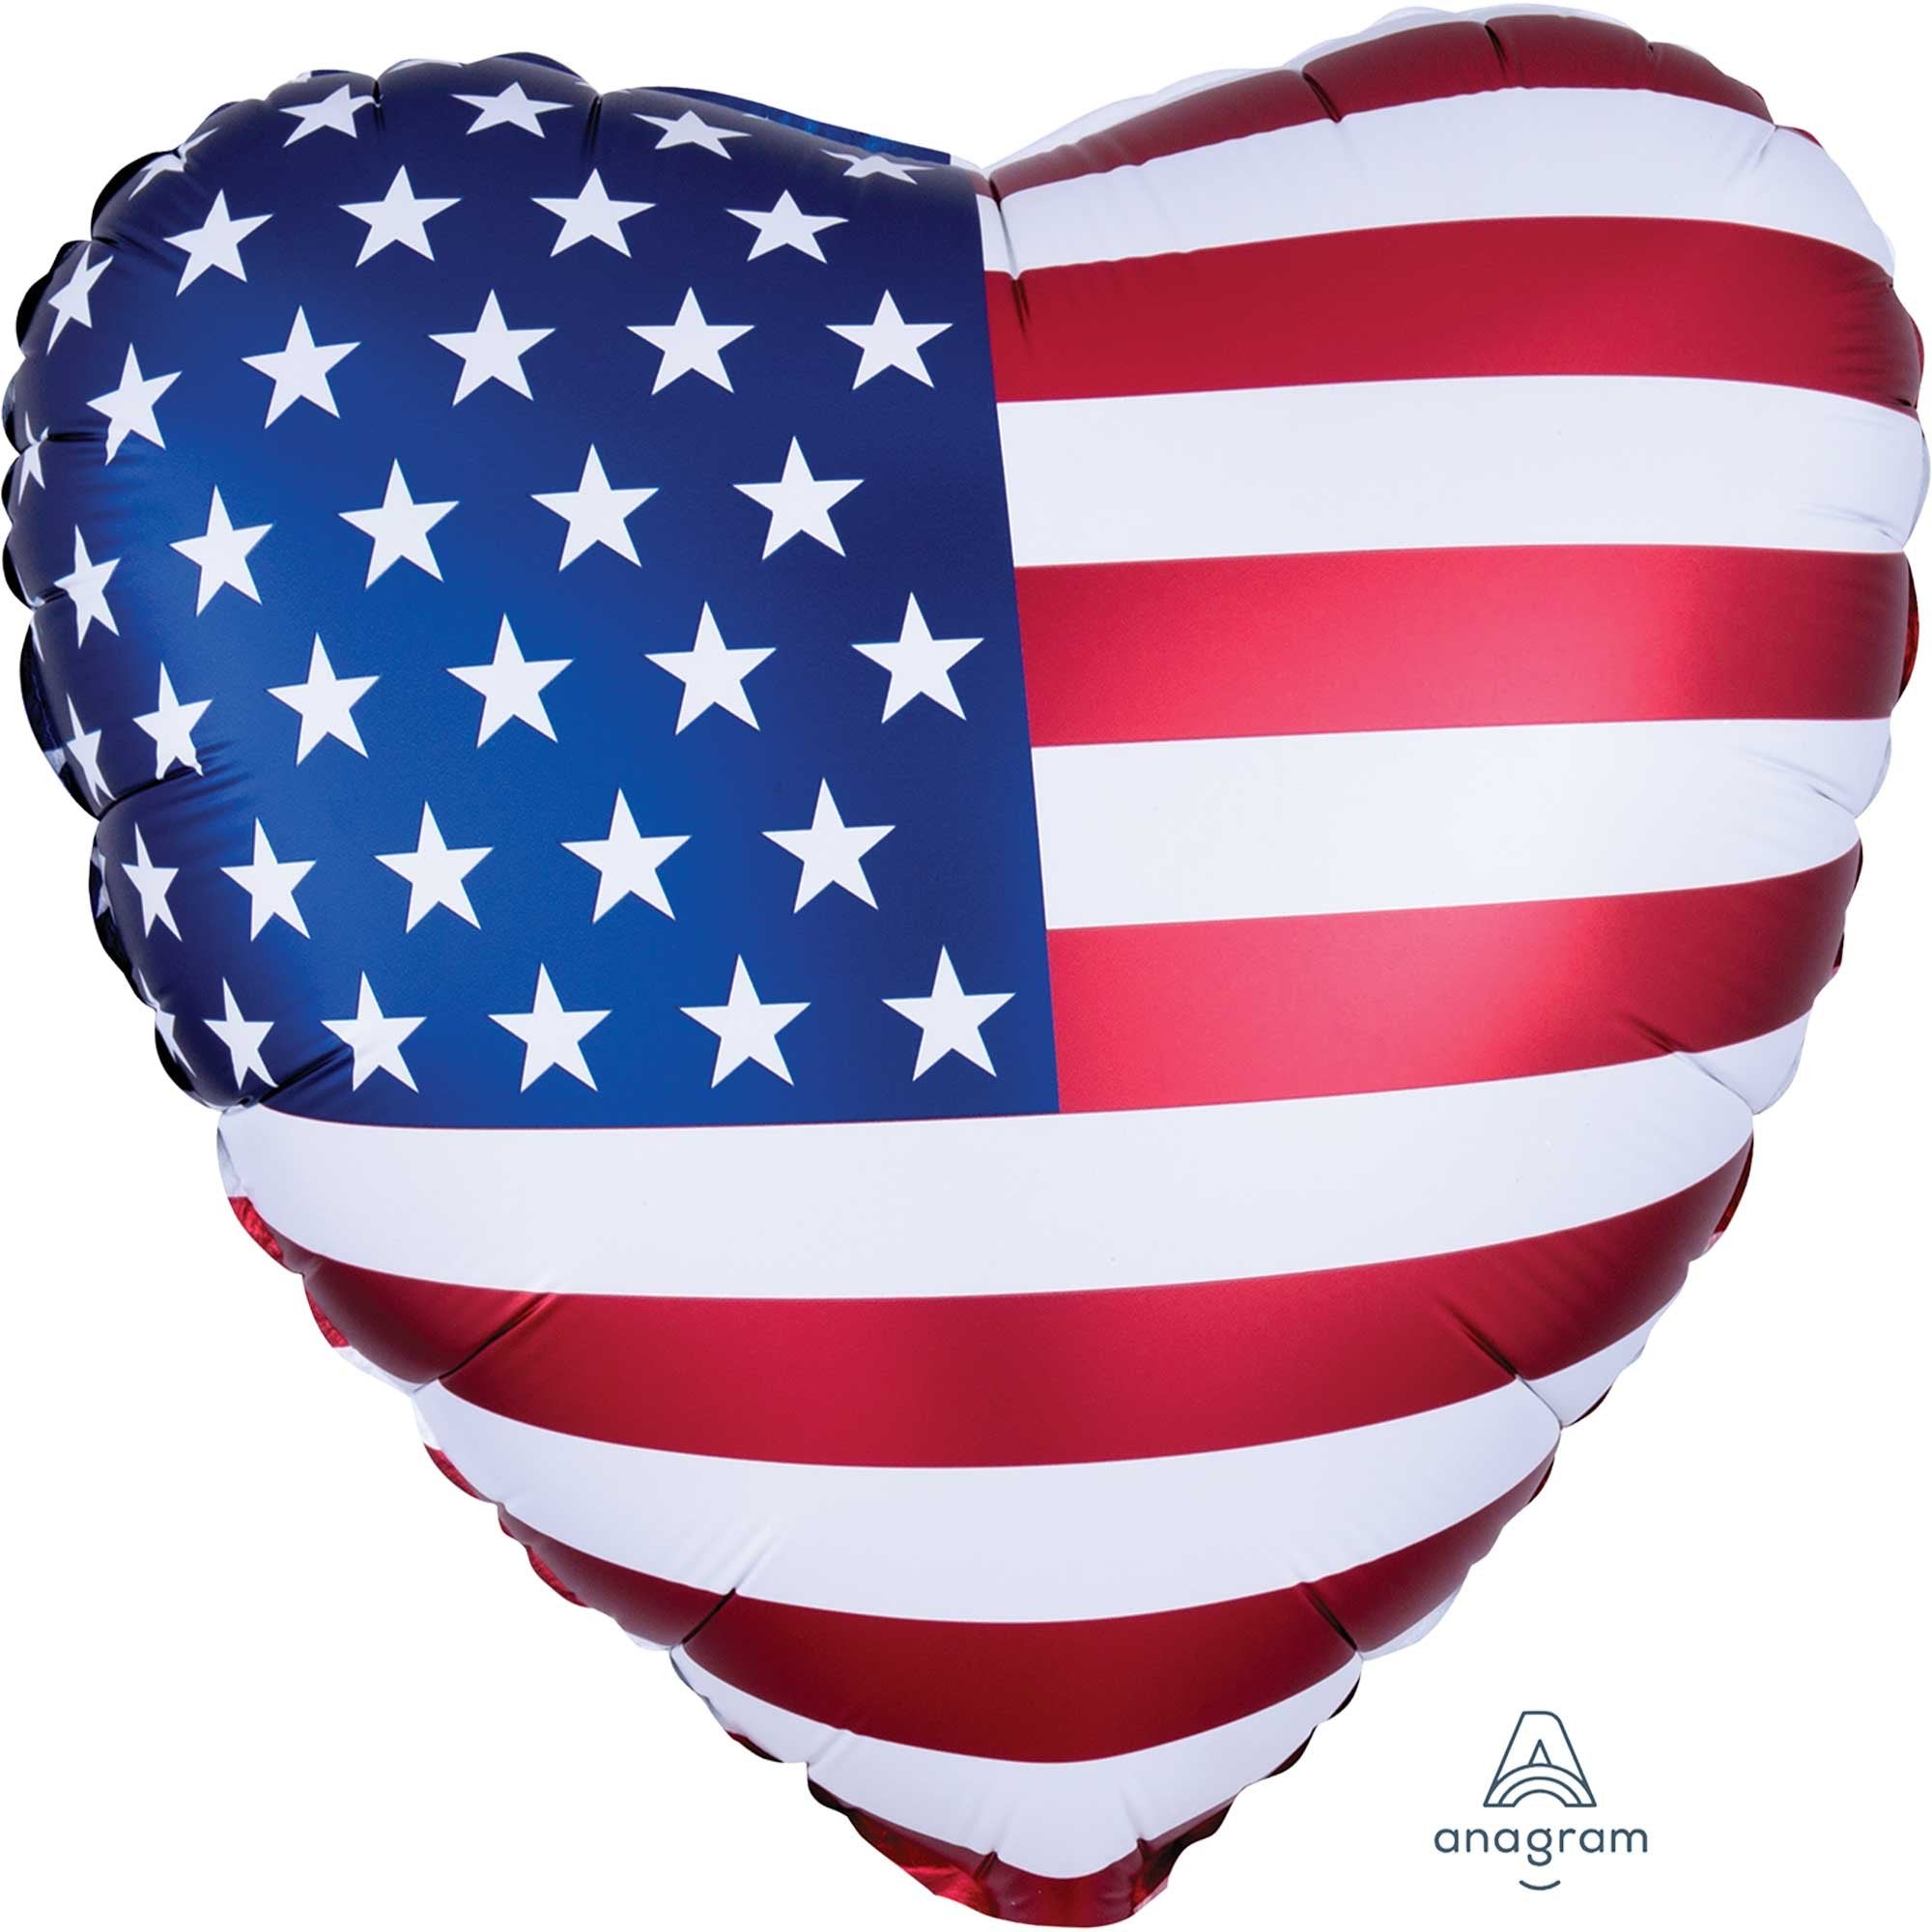 Get ready to light up the sky with our sensational 4th of July party decor! From patriotic banners to star-spangled balloons, we have everything you need to make your Independence Day celebration a blast!